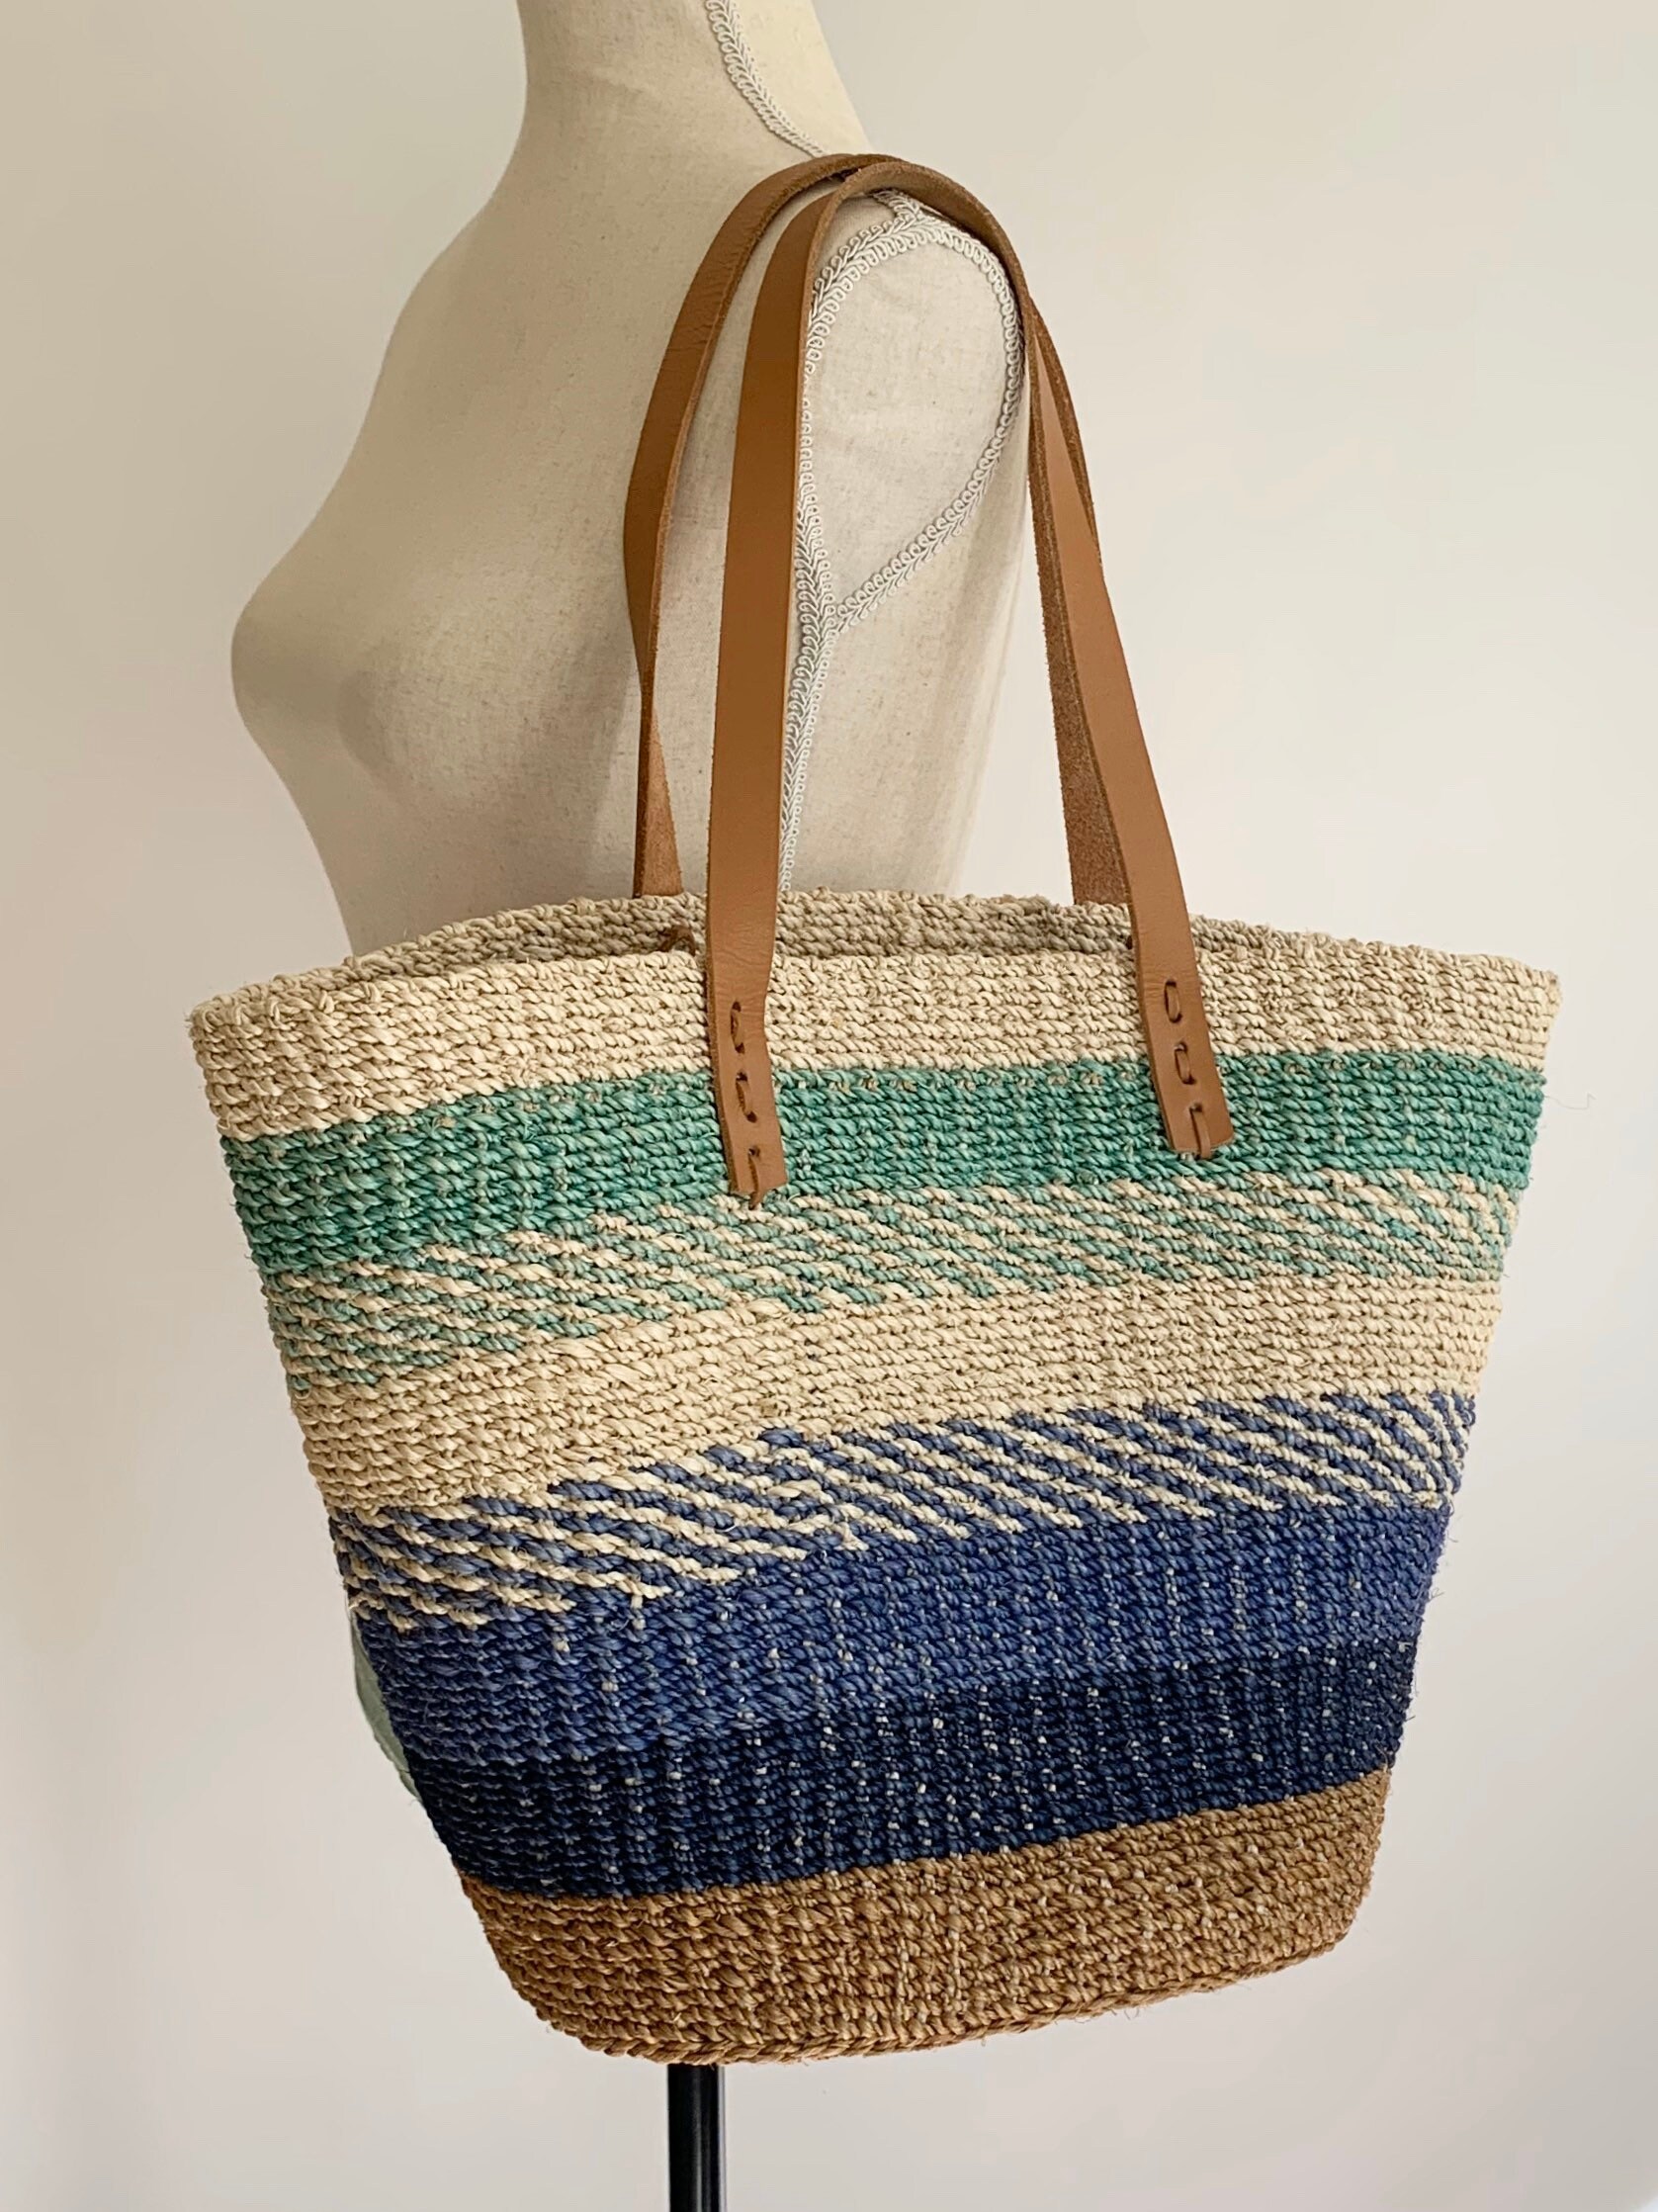 Vintage Sisal Straw Bag Purse Leather Straps Beige Brown Turquoise Blue ...